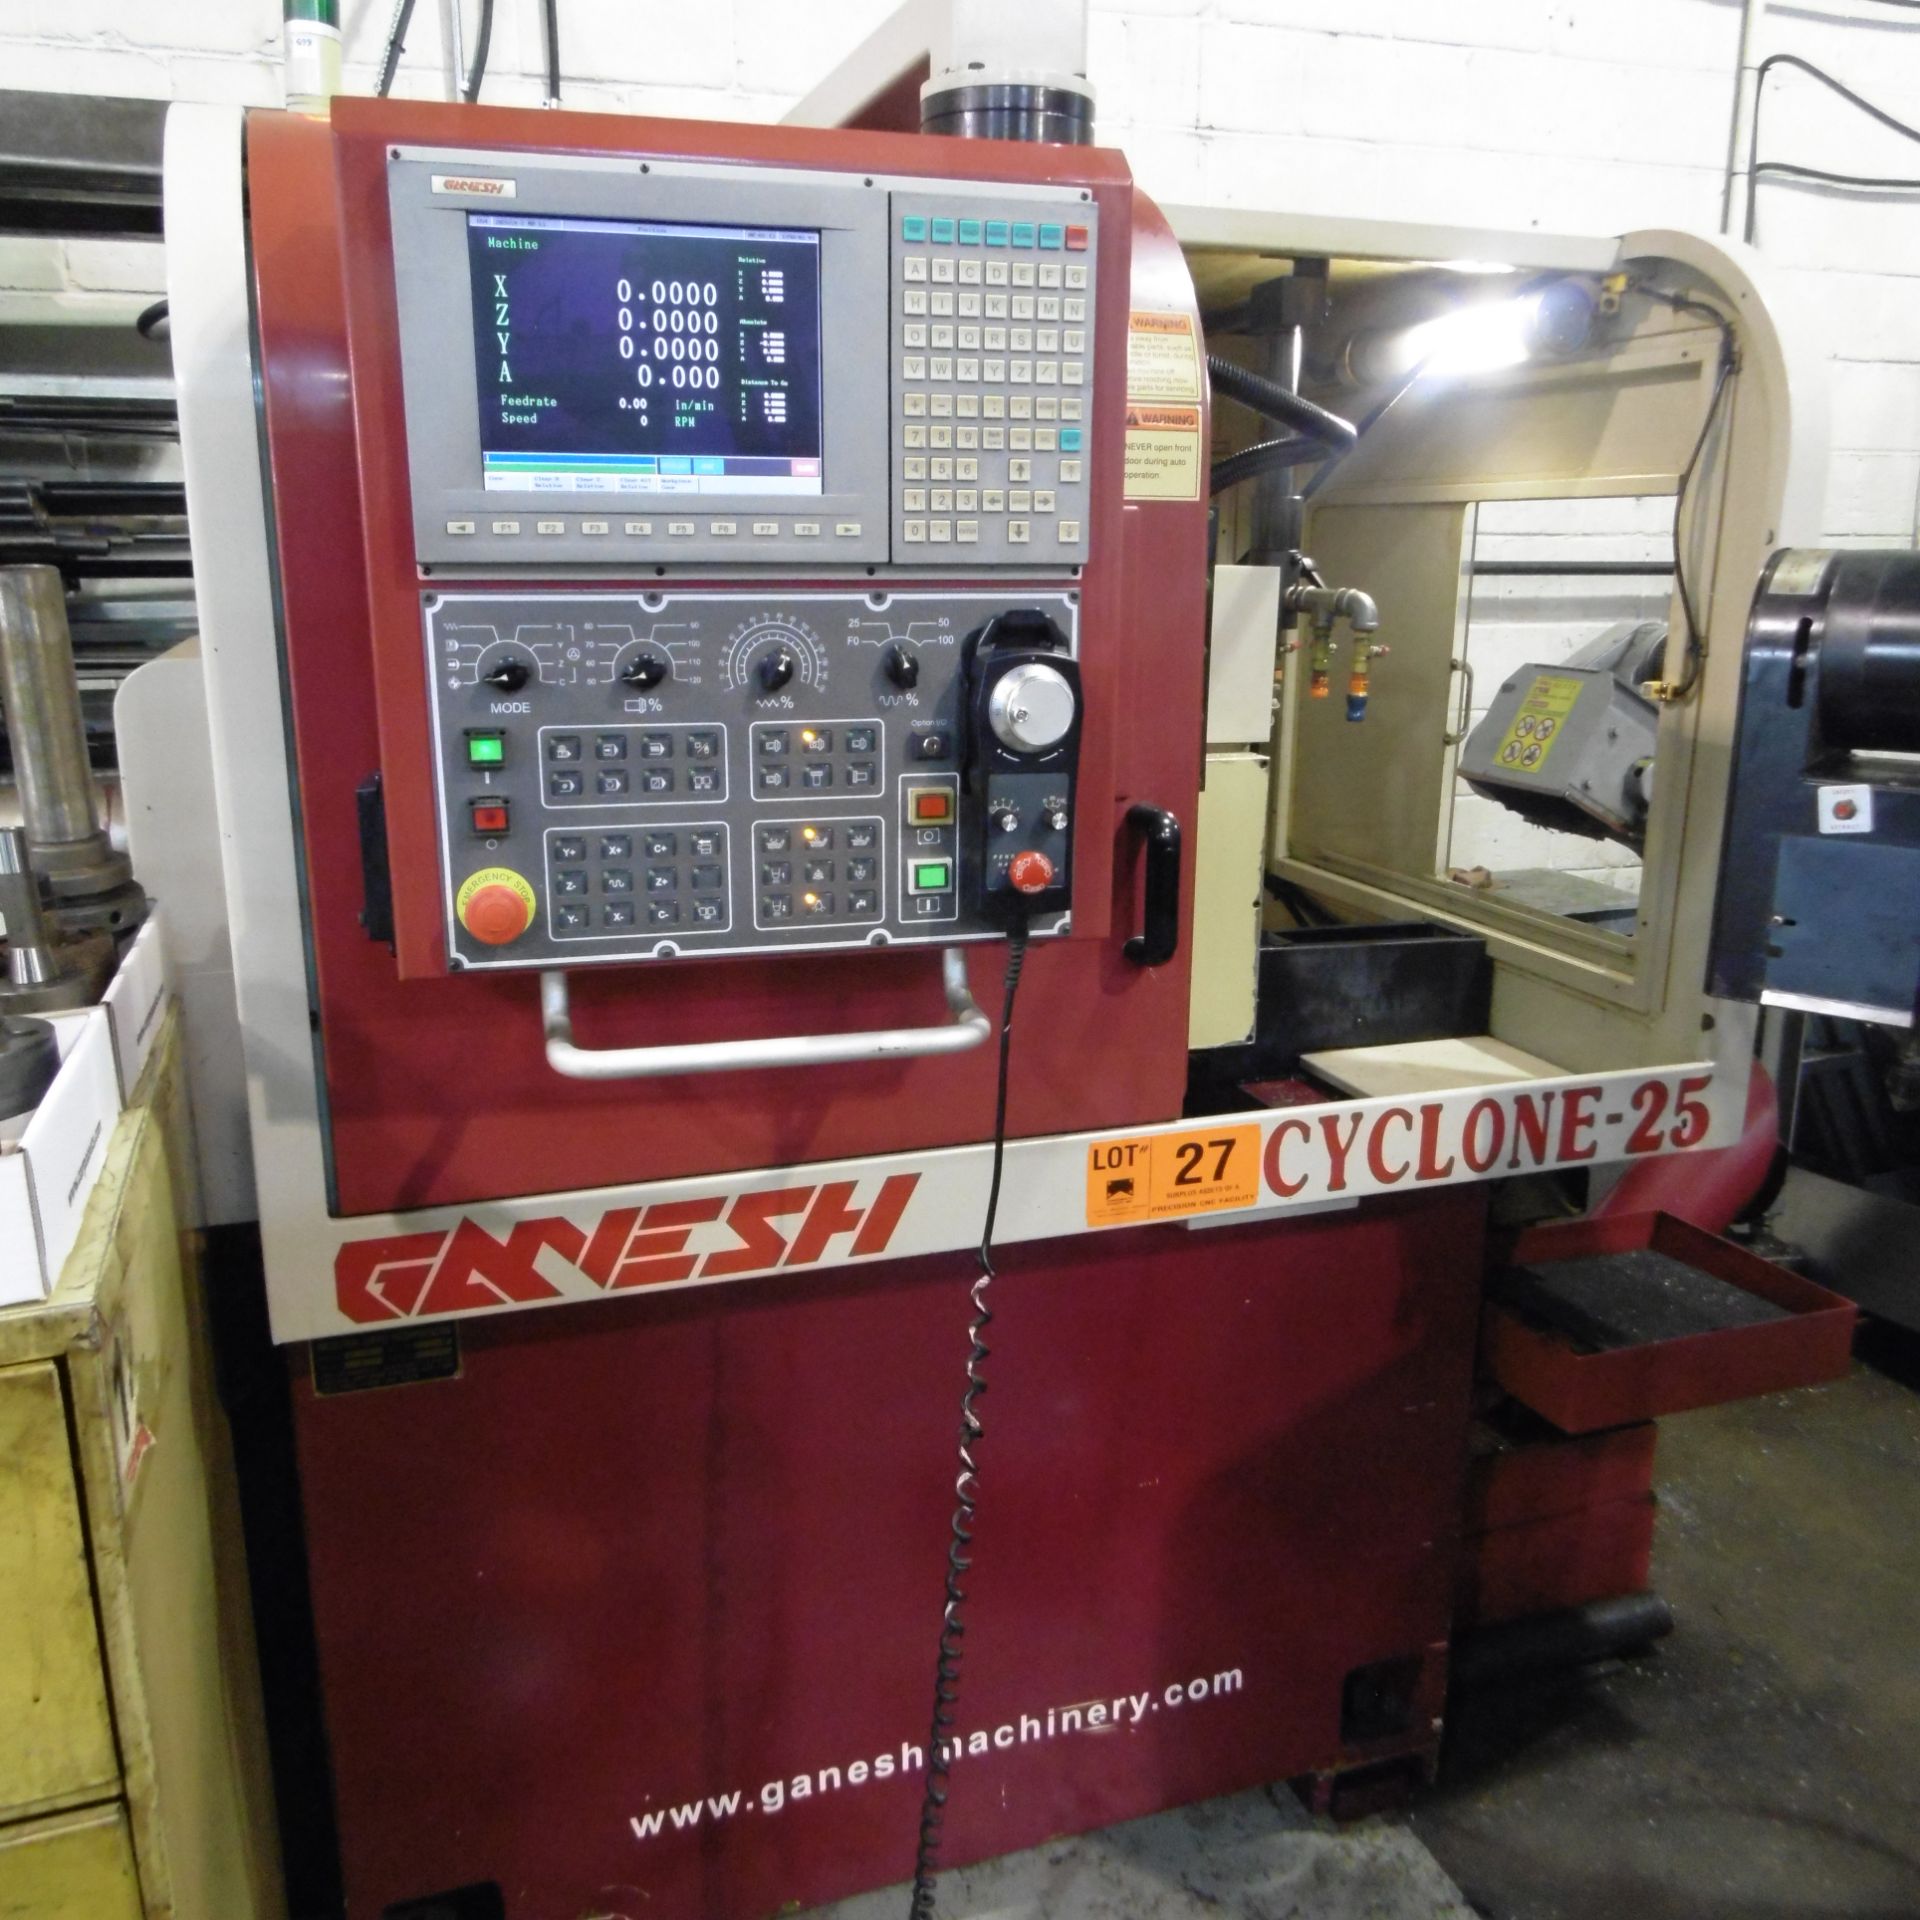 GANESH CYCLONE 25 SWISS TYPE CNC TURNING CENTER WITH SYNTECH 900 CNC CONTROL, TRAVELS X-7.5", Z-6.